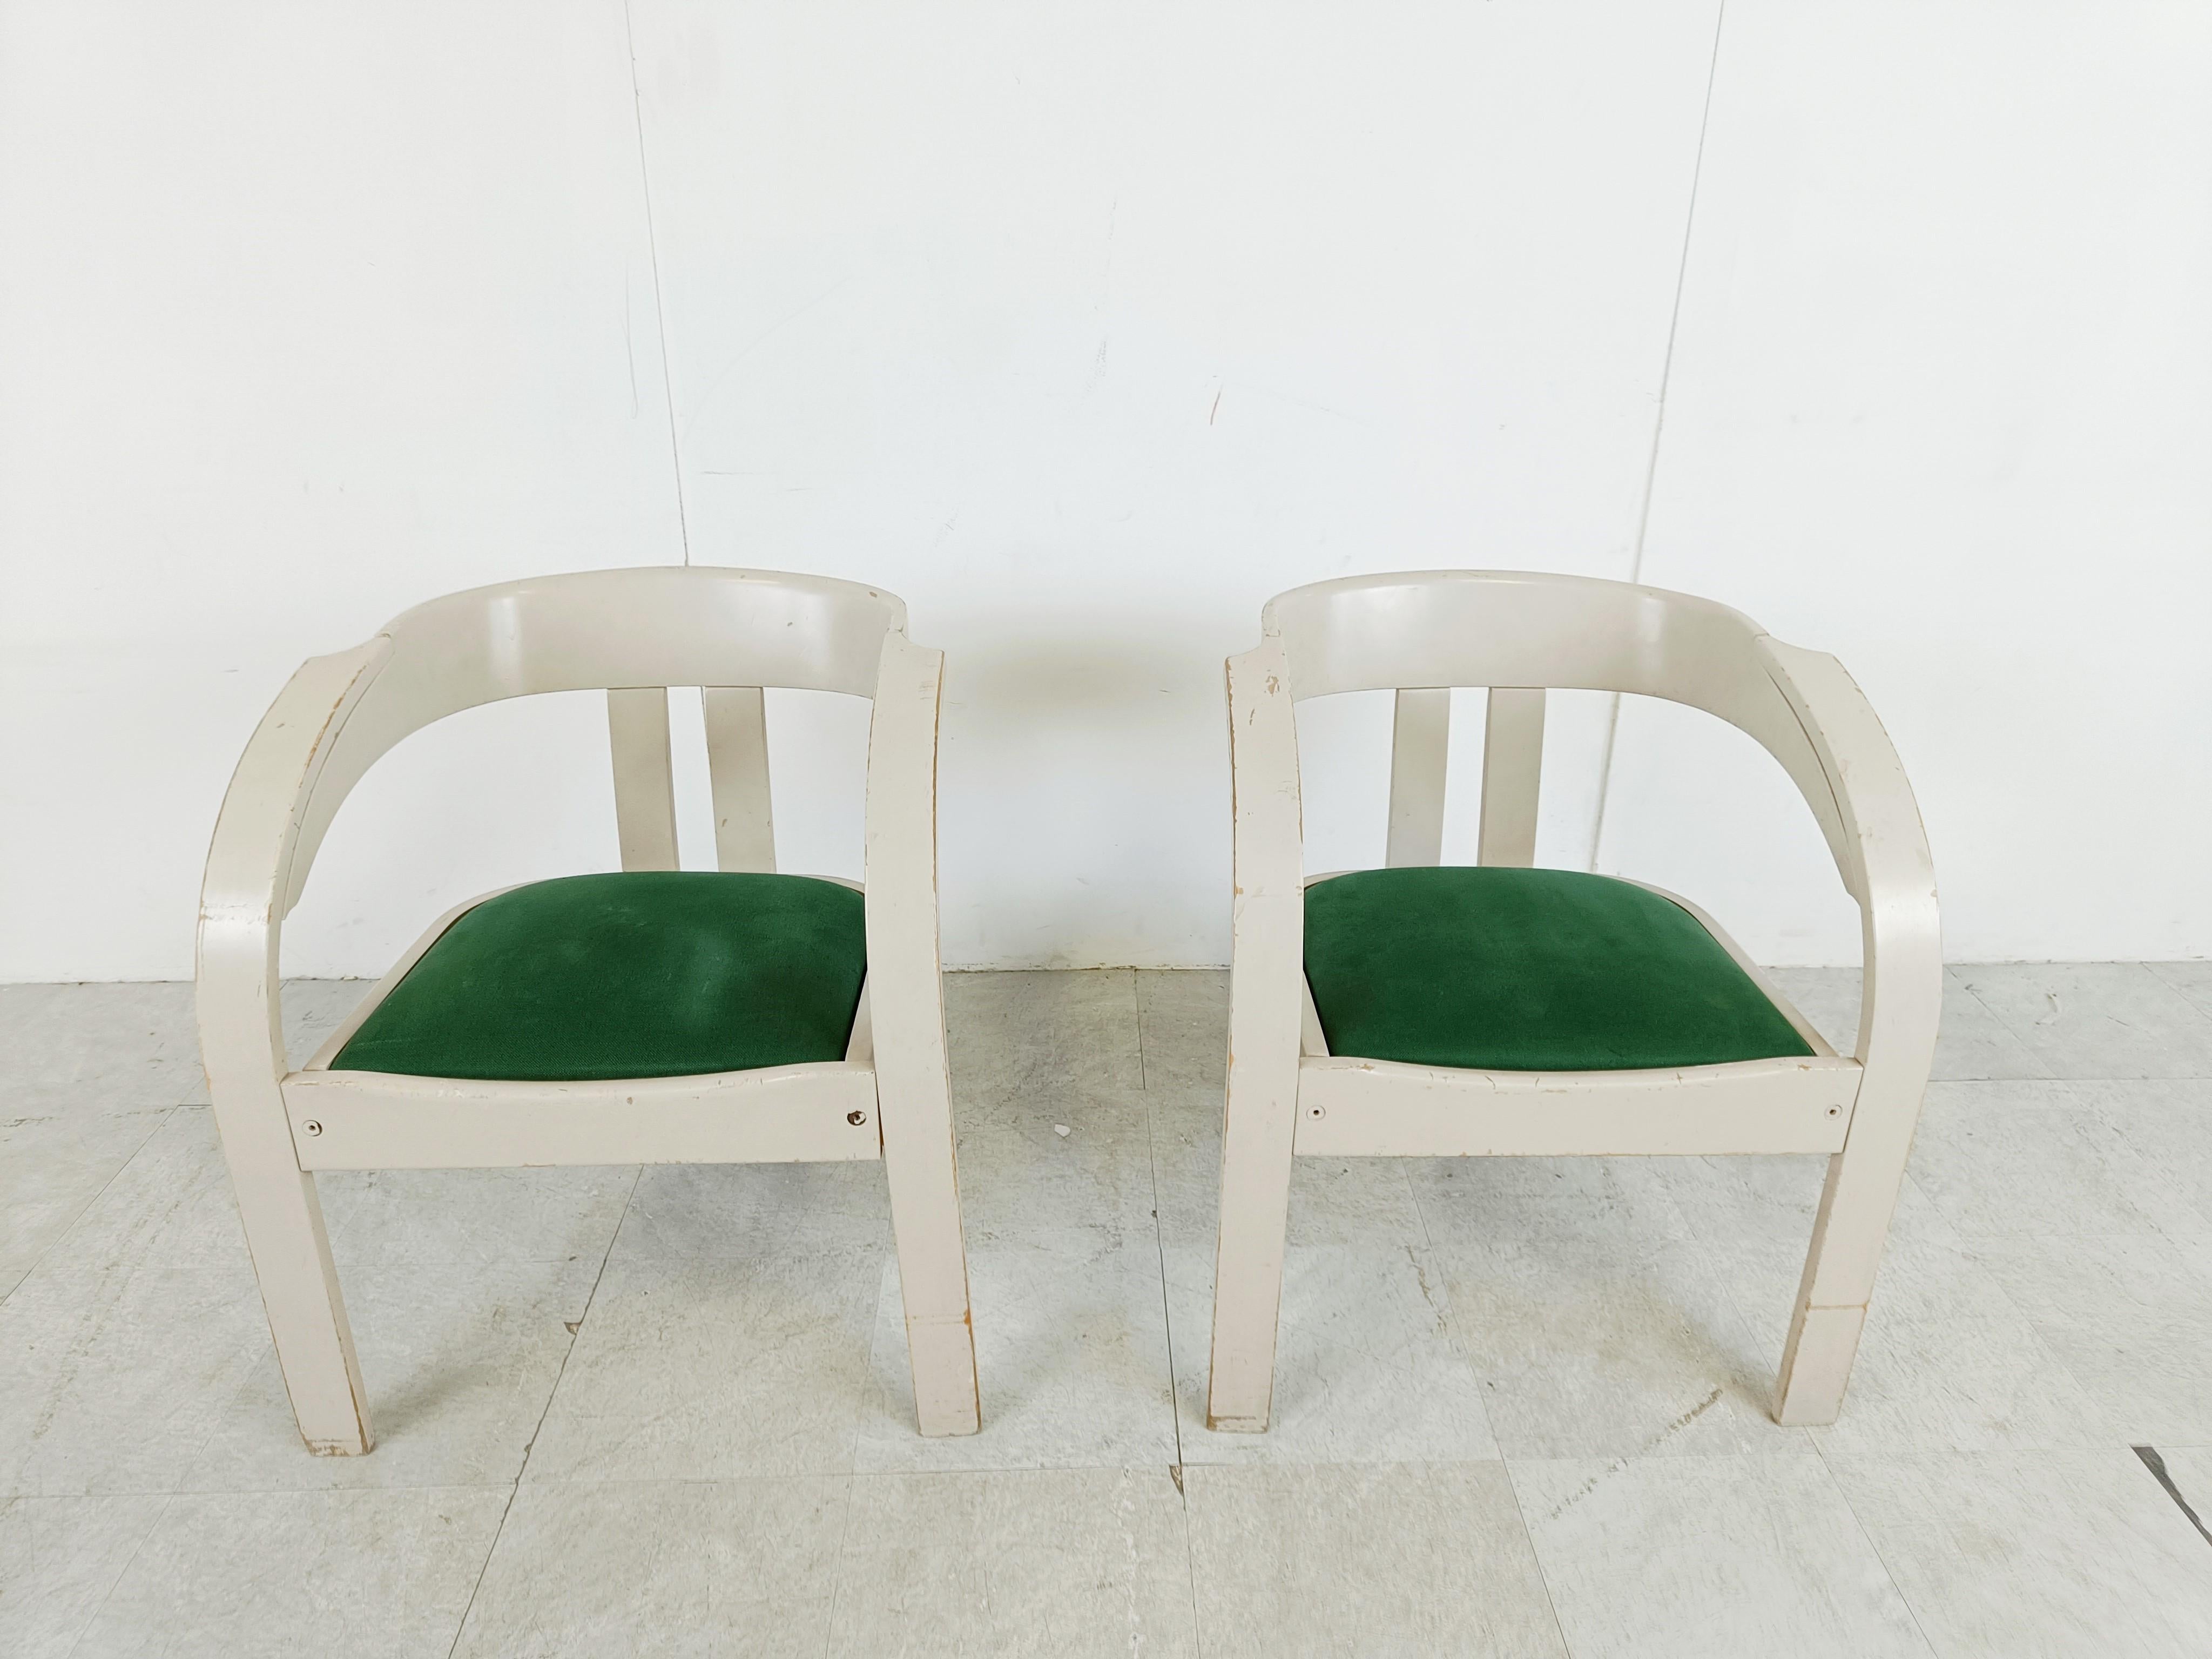 Original mid century armchairs by Giovanni Battista Bassi for Poltronova. 

These model 'Elisa' armchairs consist of a grey lacquered wooden frame and green velvet seats.

The frames are left in unrestored original condition with visible wear.

We